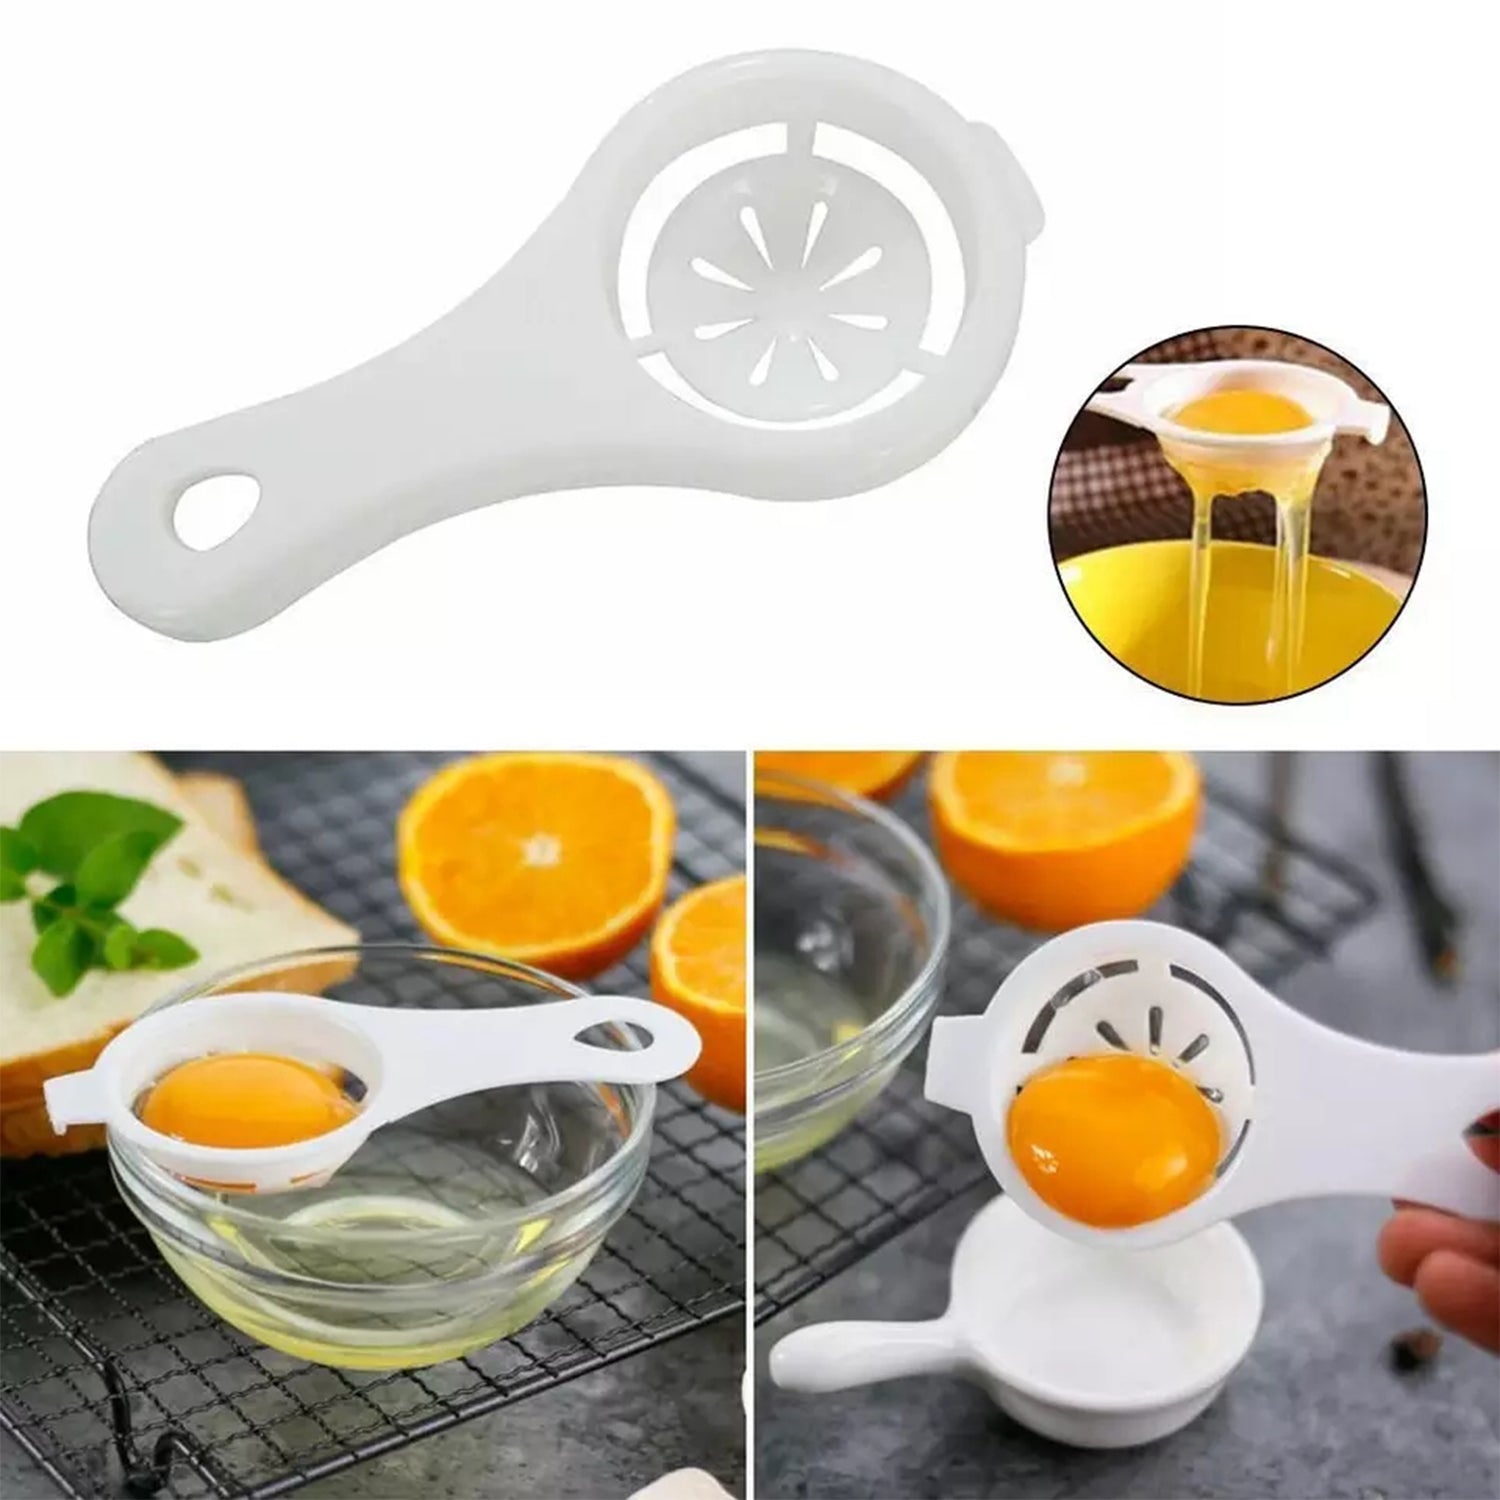 2943 4pc kitchen tools 1pc spatula brush 1pc oven glove 1pc egg yolk separator and paper cup set of 25pcs 